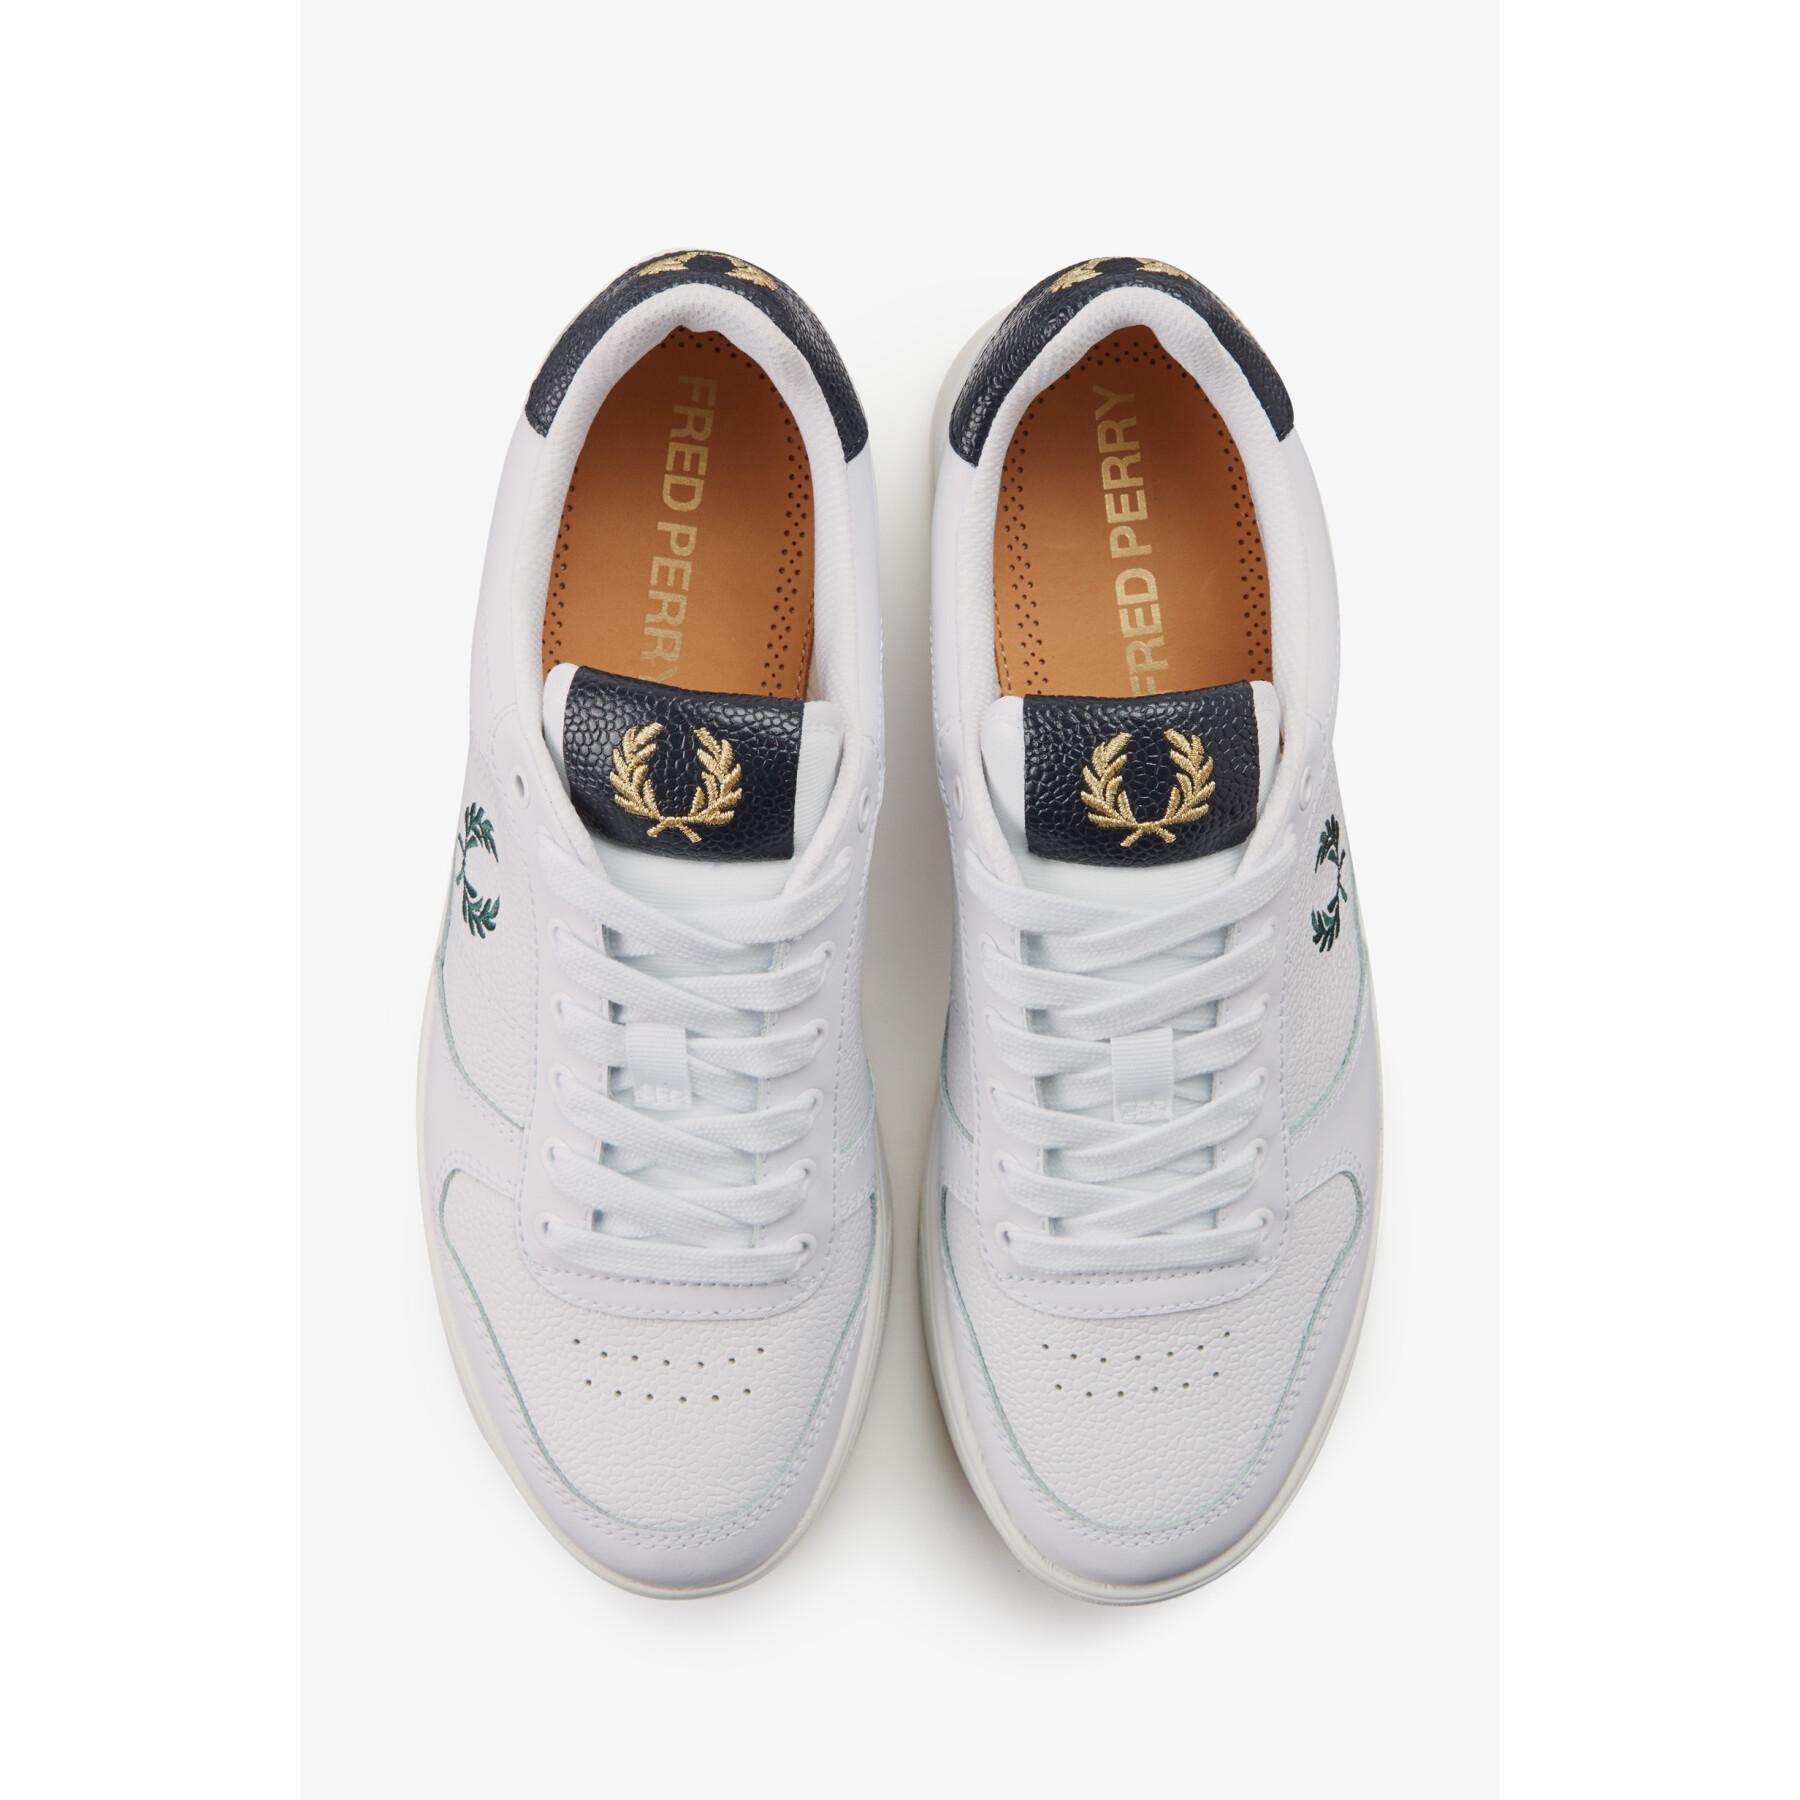 Baskets Fred Perry B300 Scotchgrain Leather